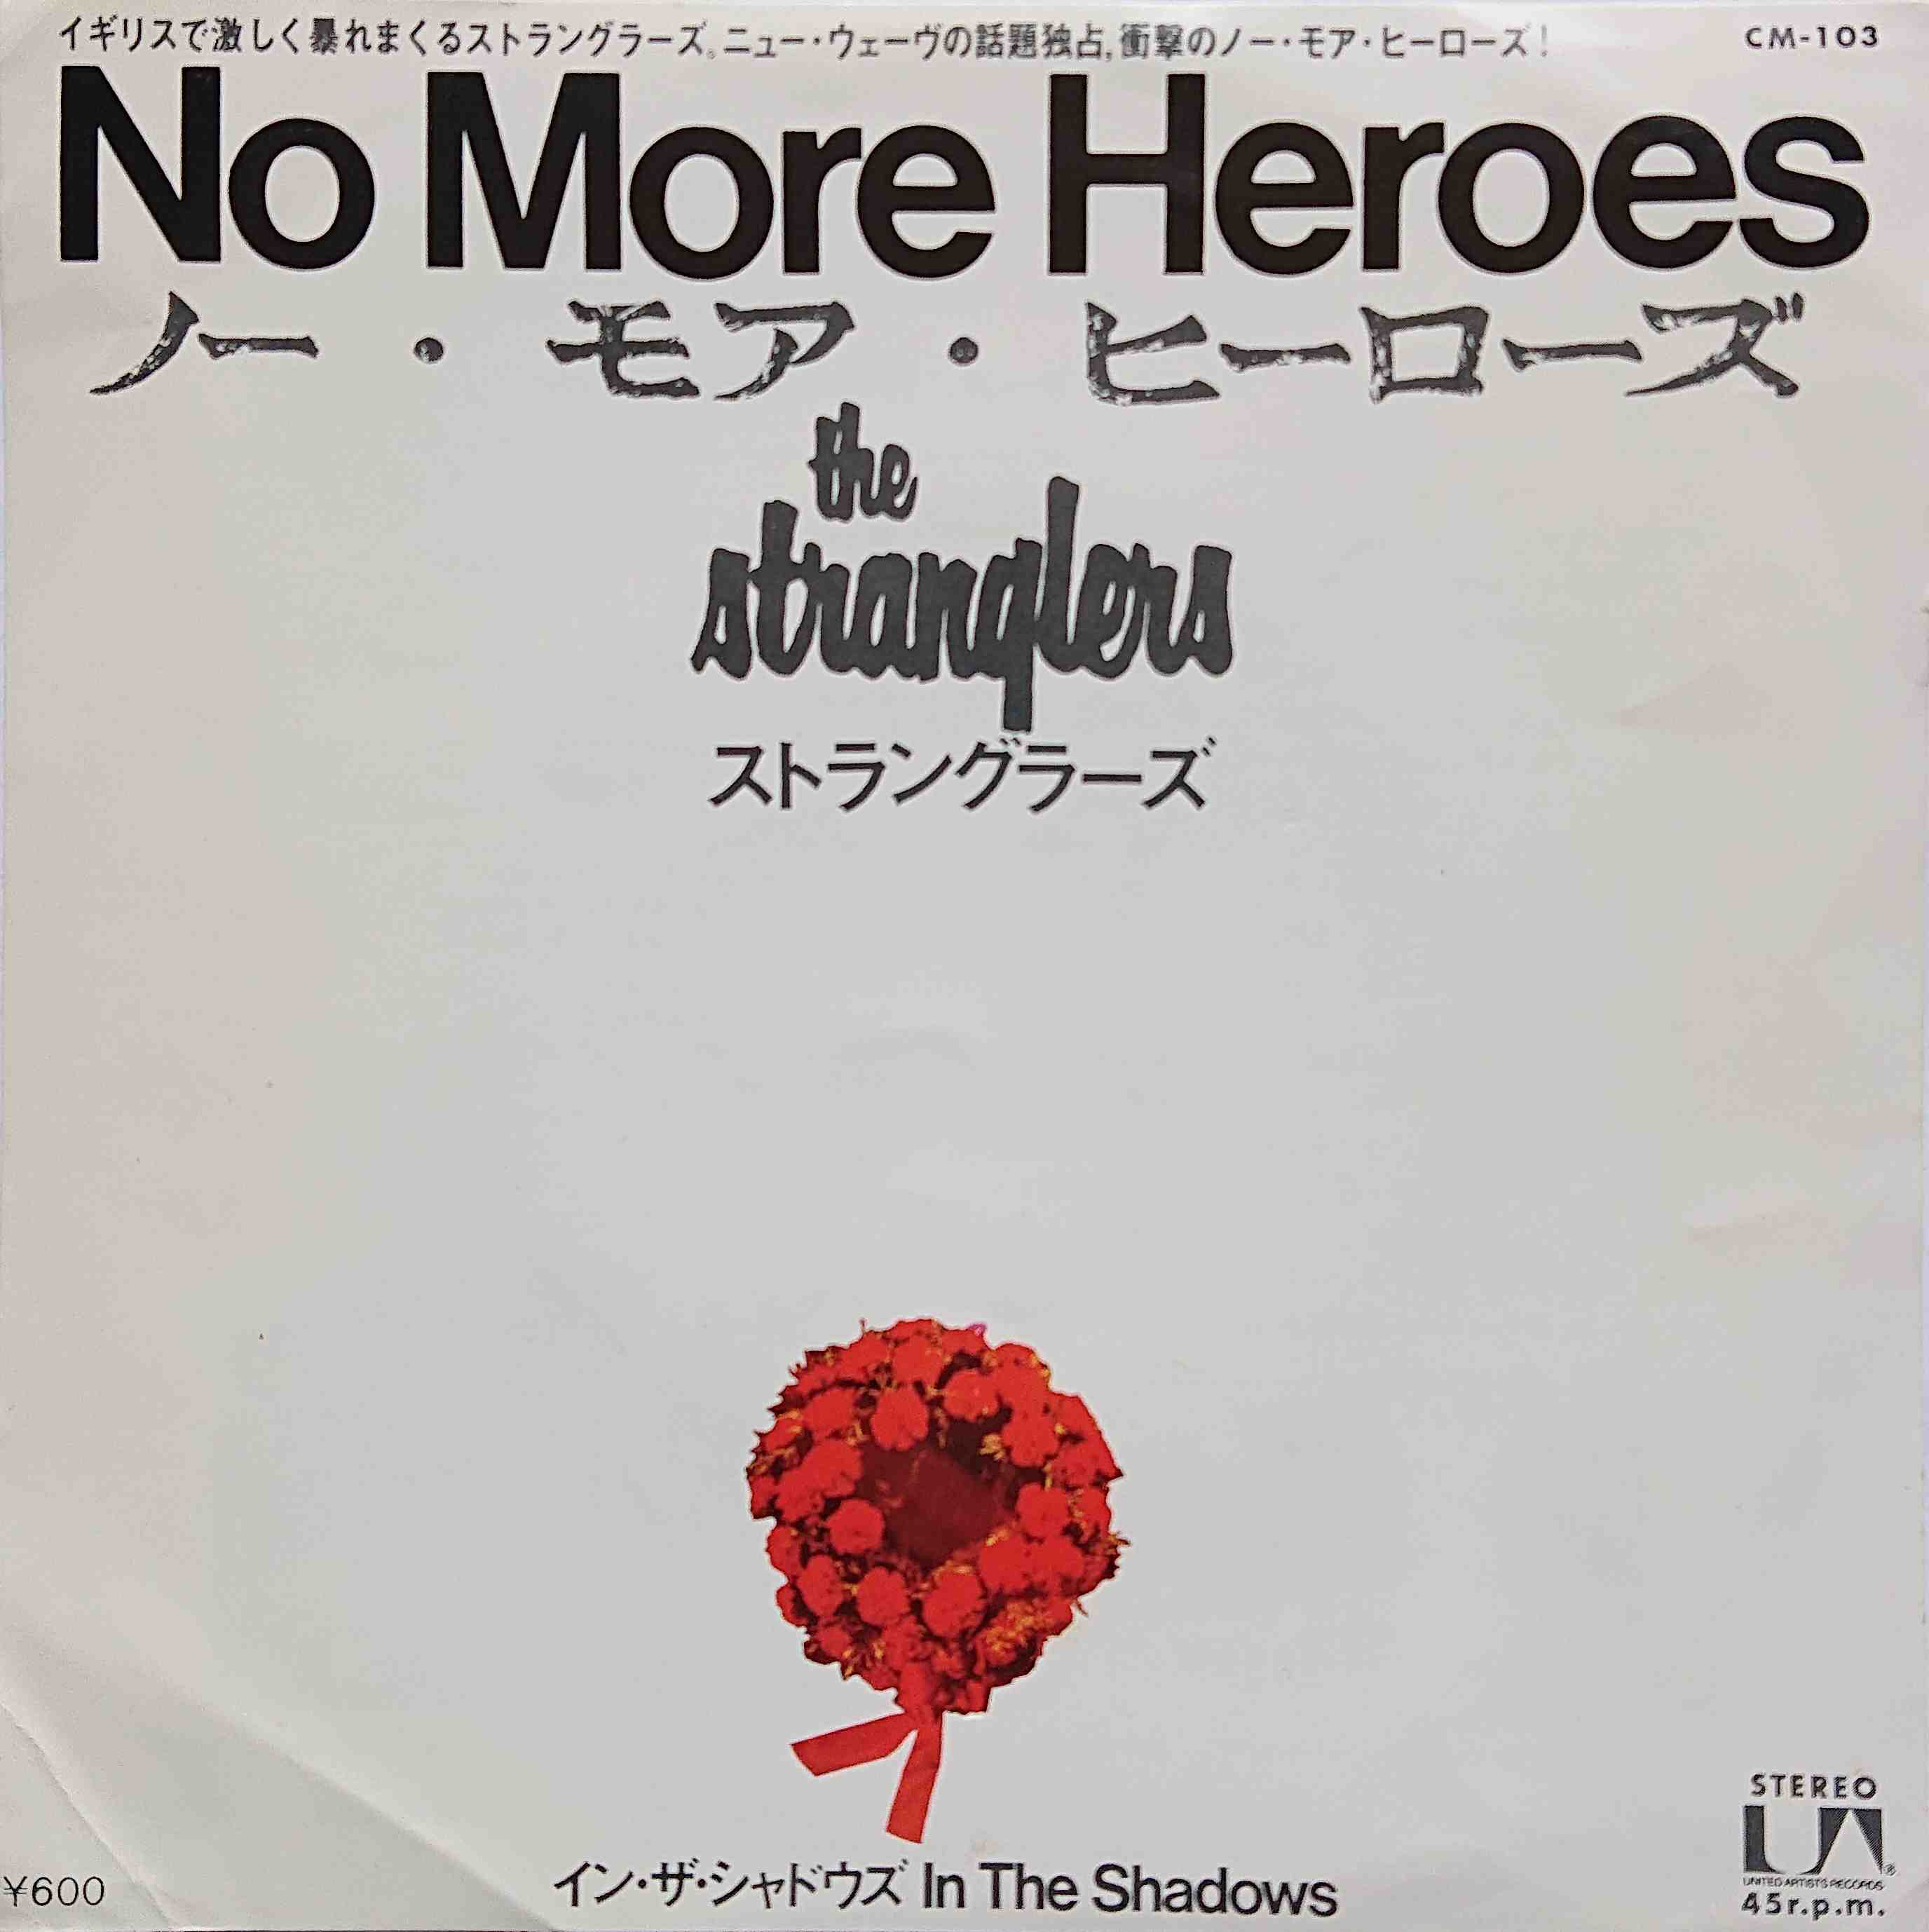 Picture of No more heroes by artist The Stranglers  from The Stranglers singles